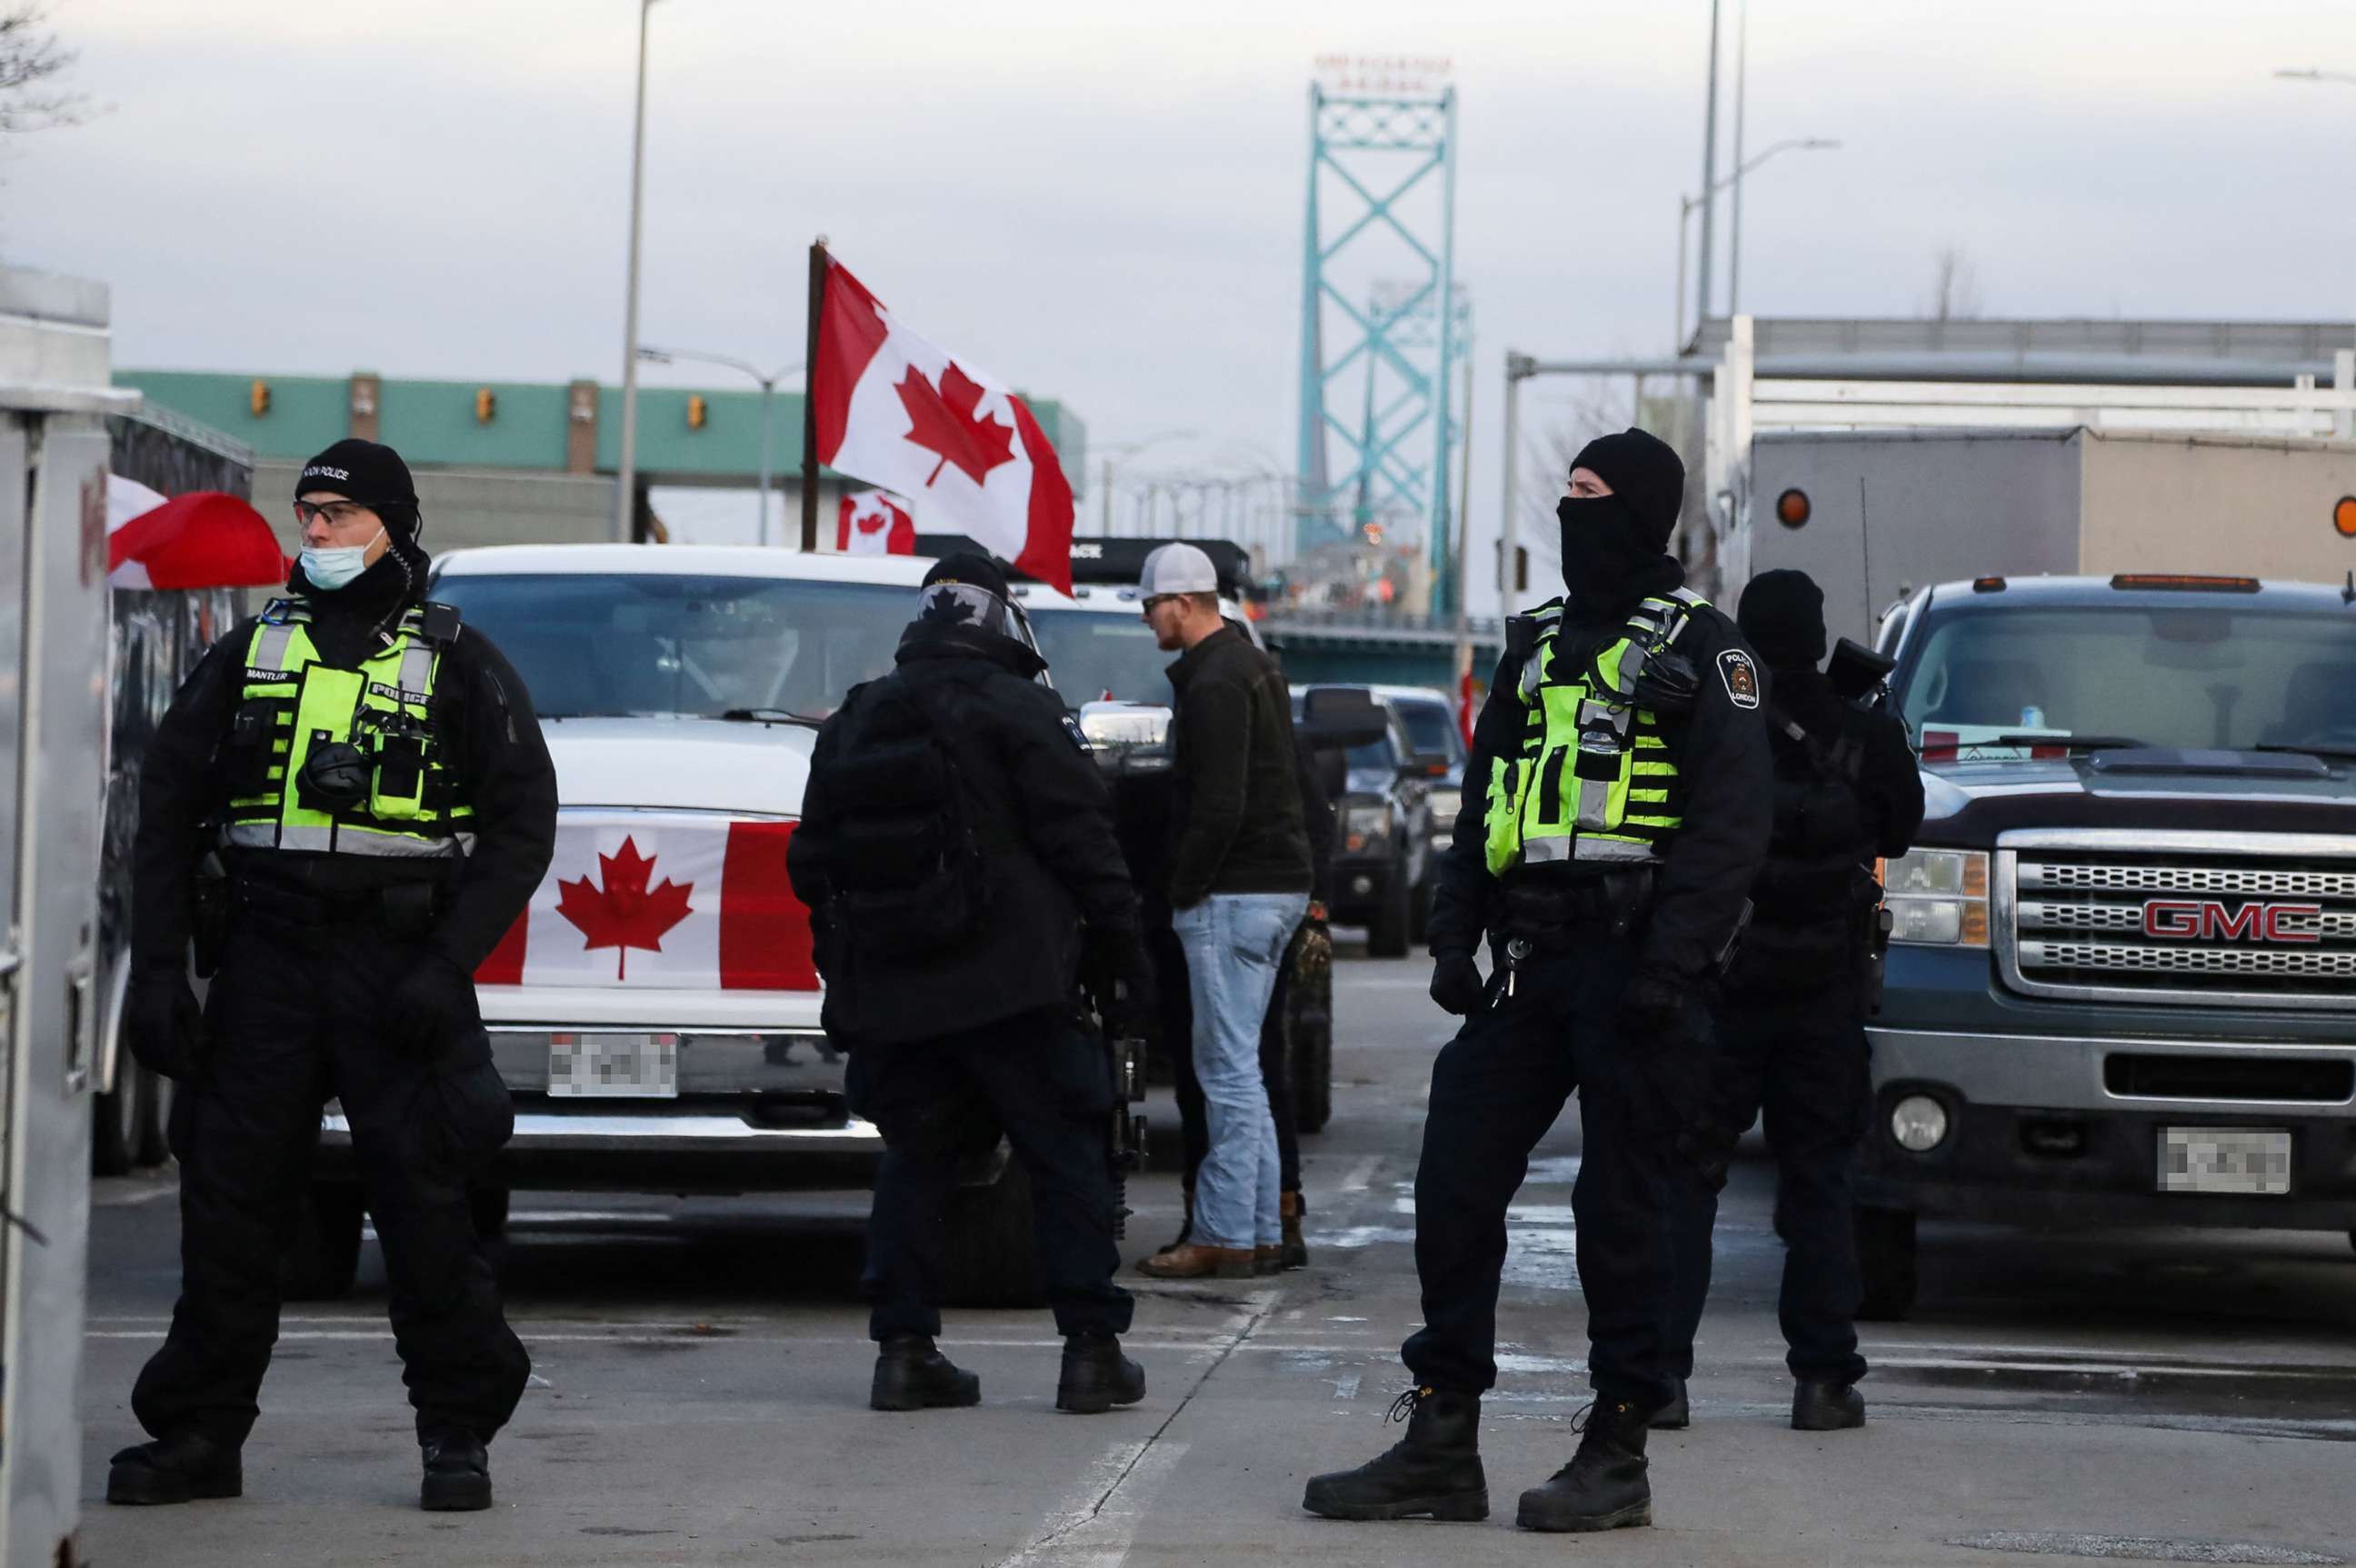 PHOTO: Police officers stand guard on a street as truckers and supporters continue blocking access to the Ambassador Bridge, which connects Detroit and Windsor, in protest against COVID-19 vaccine mandates, in Windsor, Ontario, Canada, Feb. 12, 2022. 